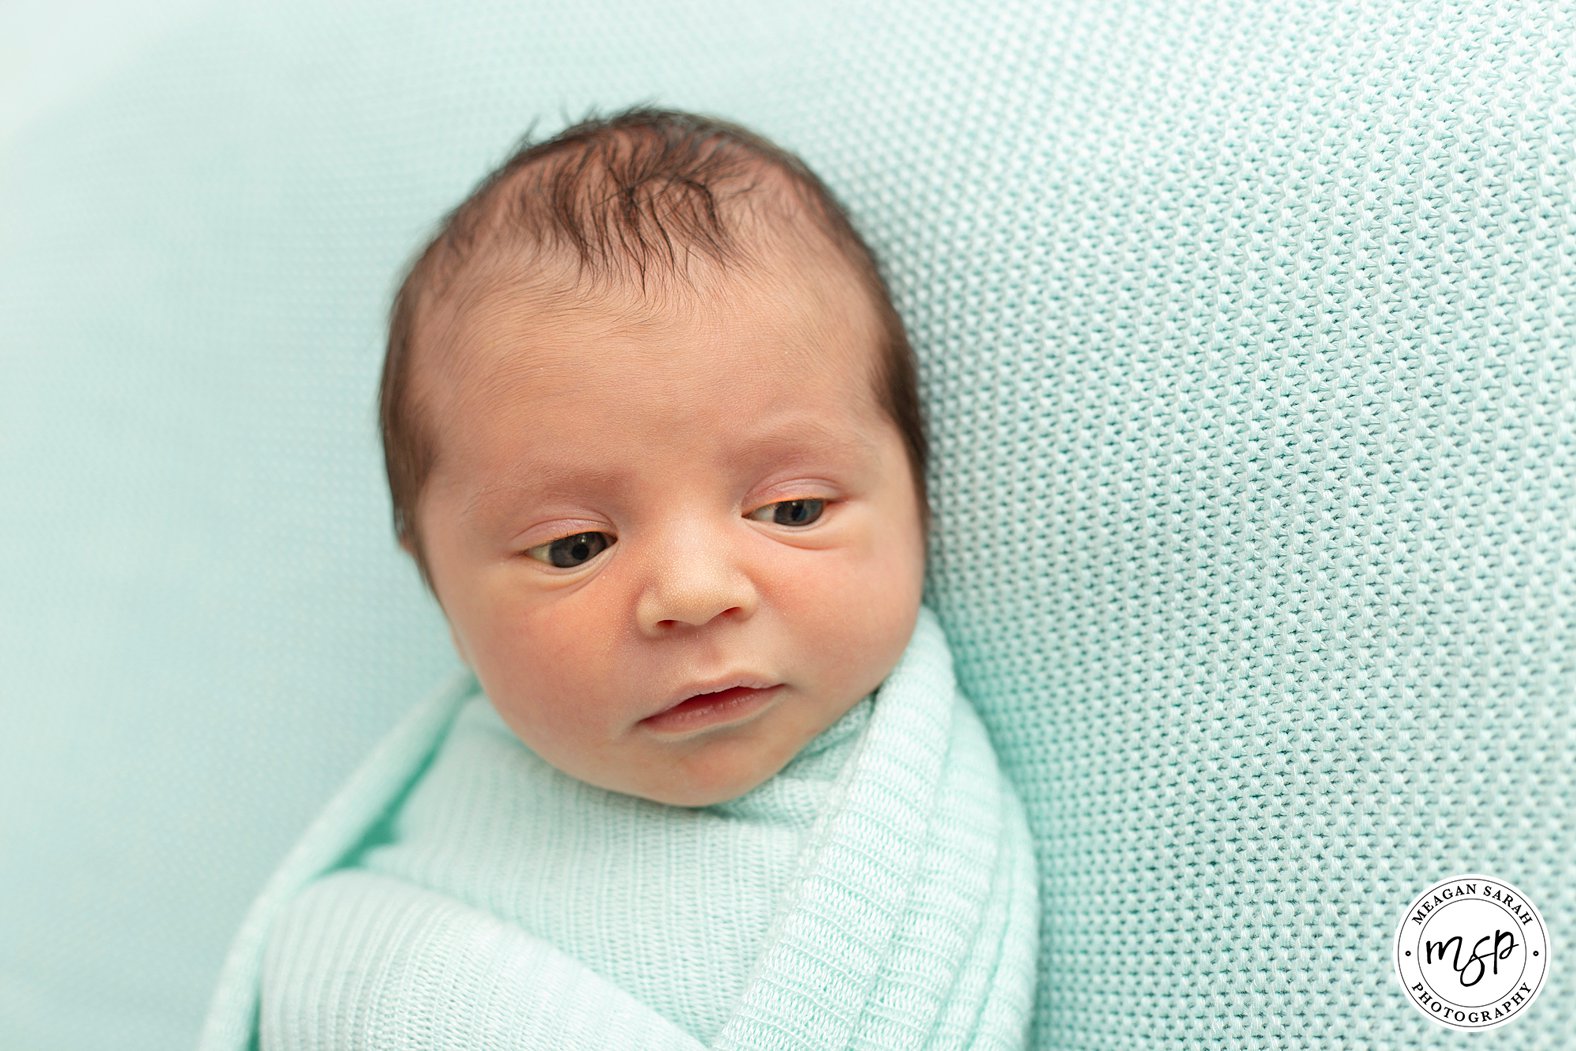 Turquoise,Turtle on back,Baby Photographer Leeds,Baby Photography Leeds,Leeds Newborn Photographer,Leeds Newborn Photography,Leeds Photographer,Professional Photographer in Leeds,West Yorkshire Photographer,Yorkshire Newborn Photographer,Yorkshire Newborn Photography,